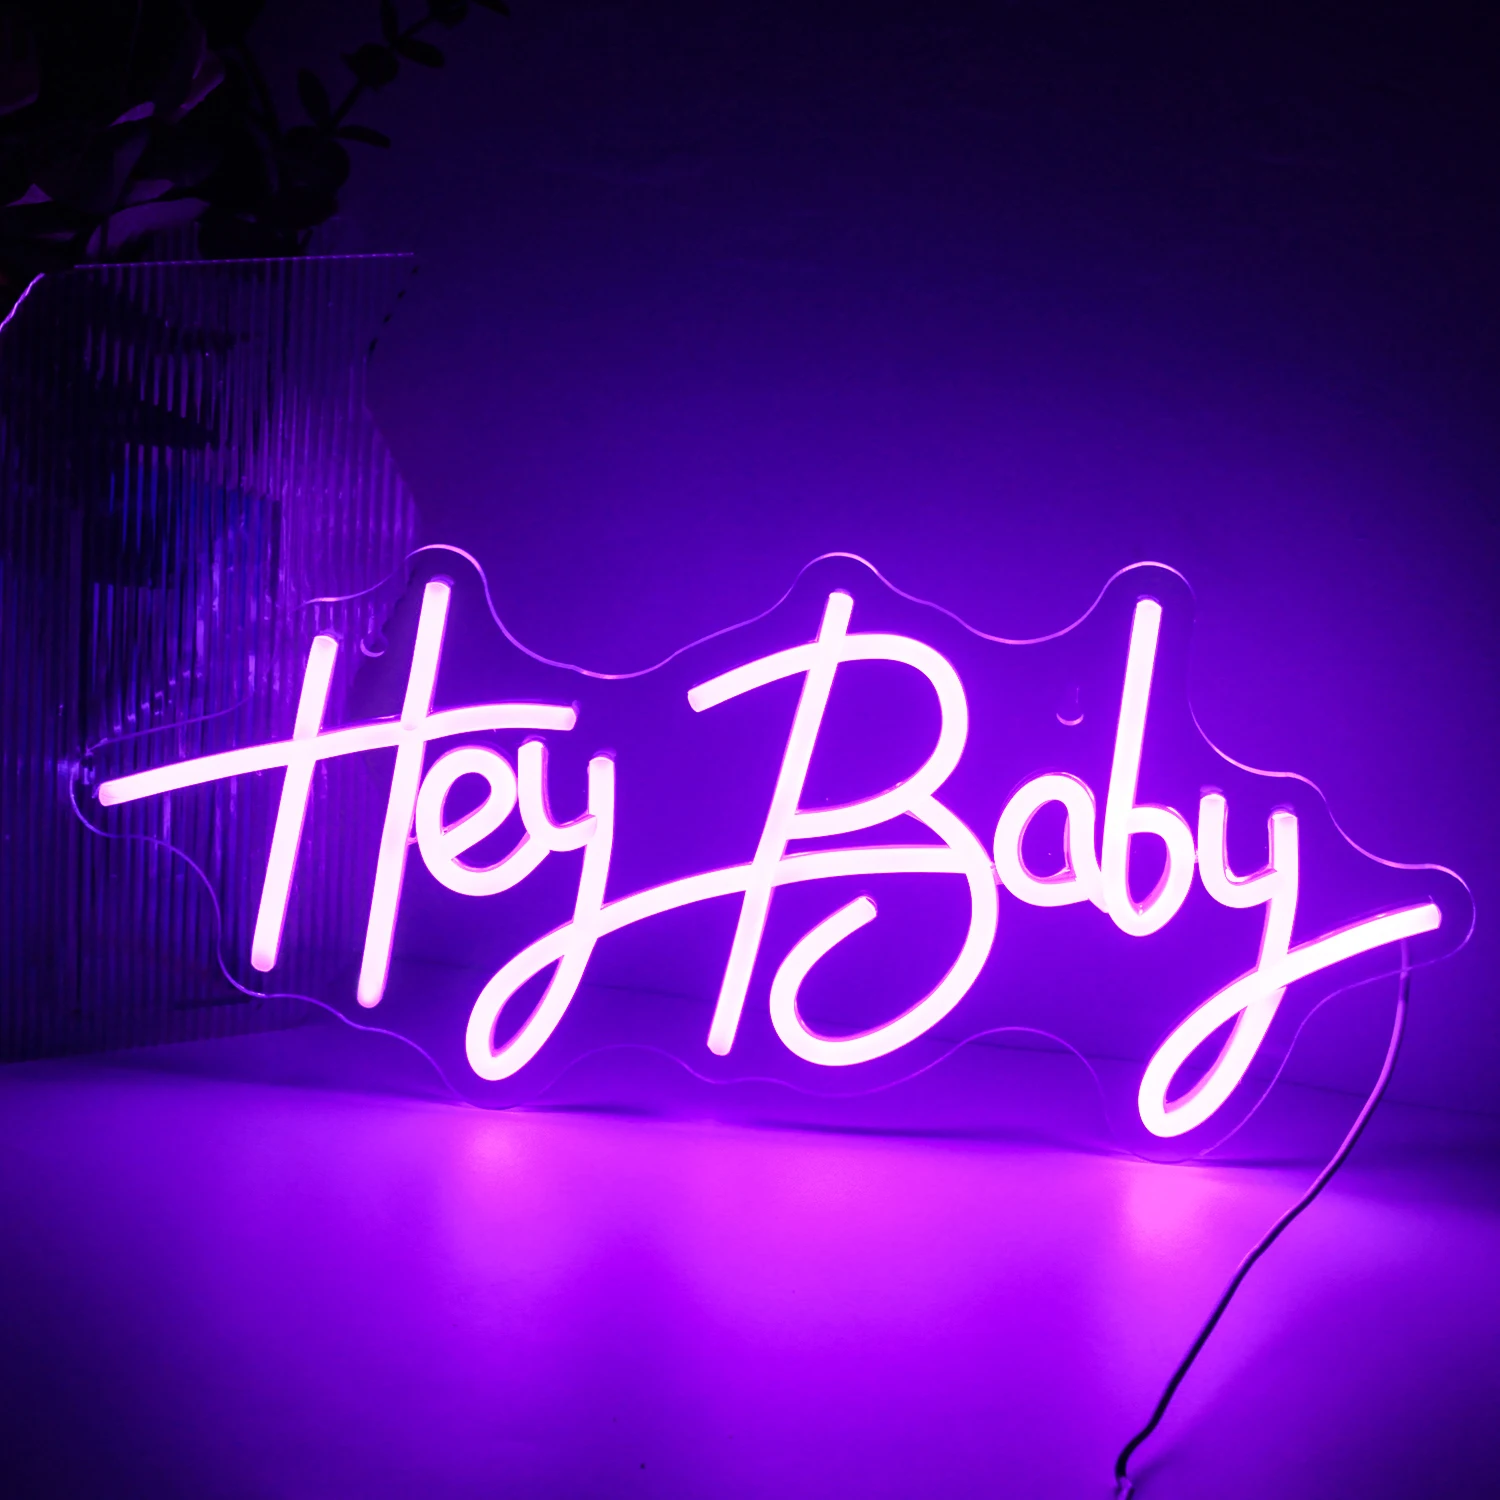 Ineonlife Neon Lights Hey Baby Sign LED Lamps Wedding Proposal Party ART Decorations Children Birthday Room Colour Lights